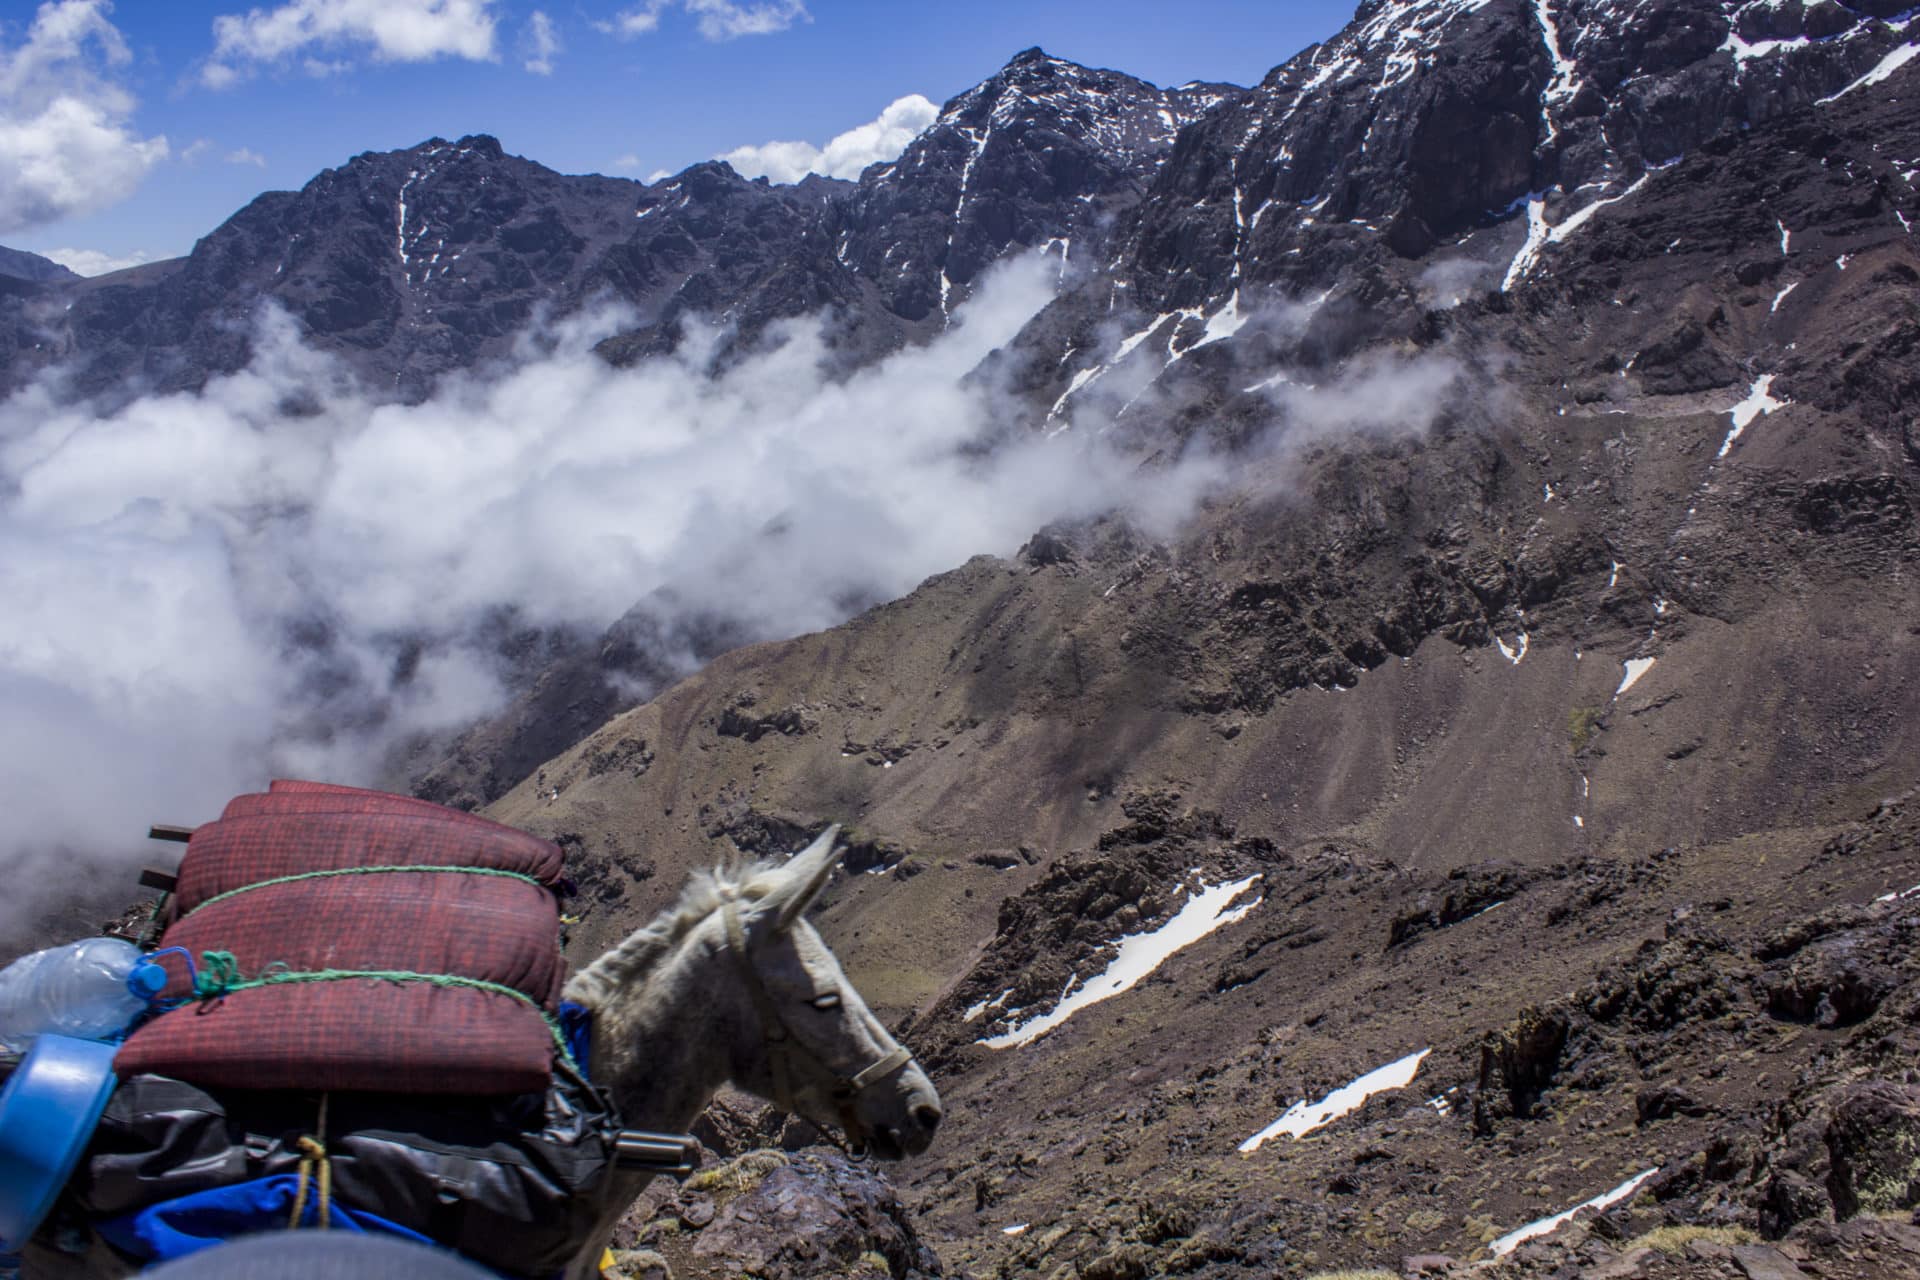 Mule heading to the Toubkal Refuge